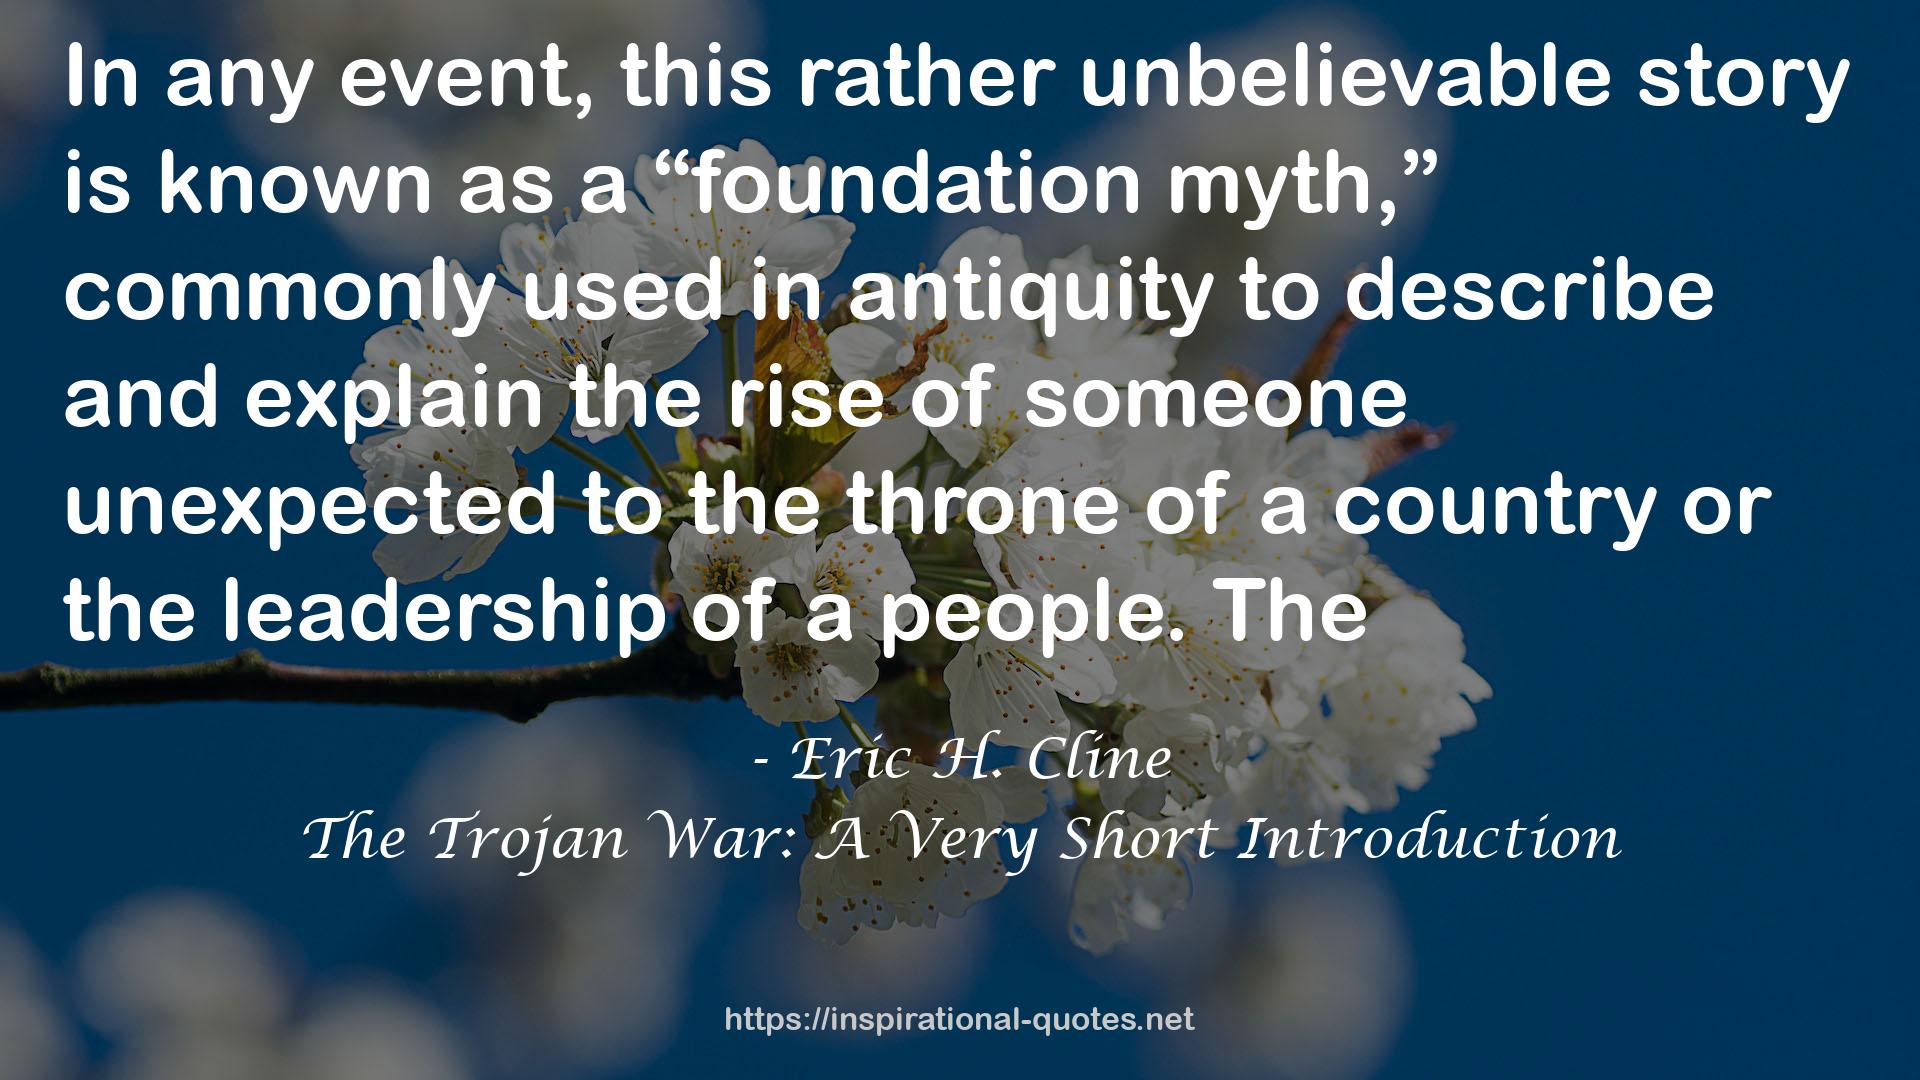 The Trojan War: A Very Short Introduction QUOTES